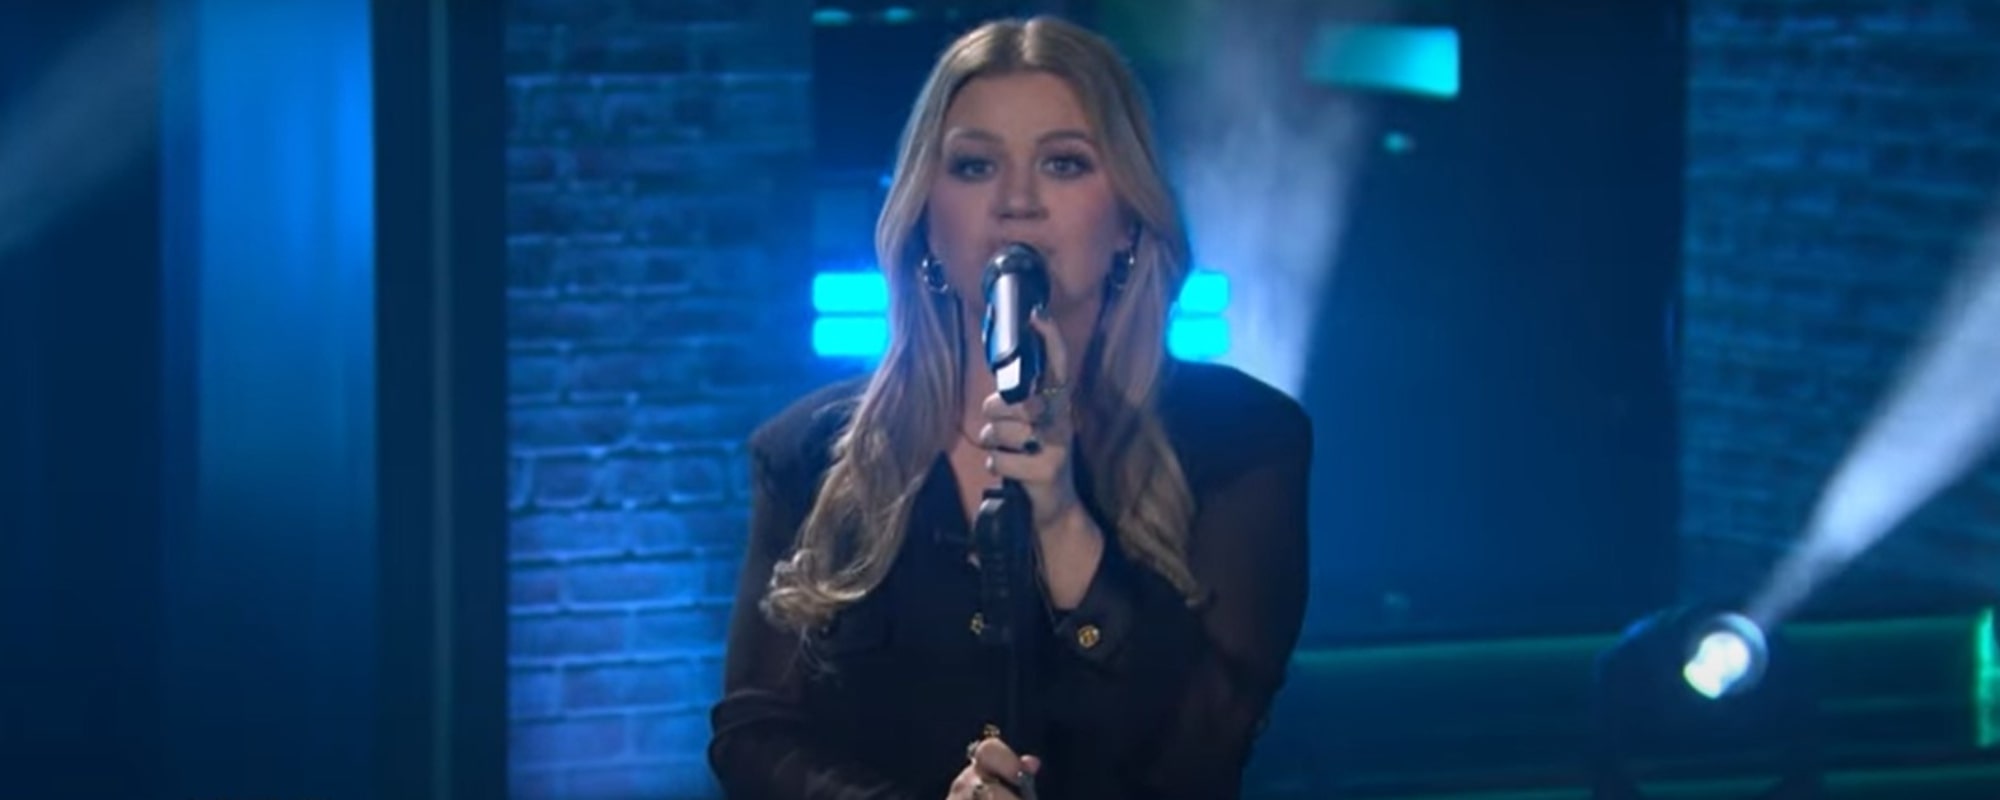 Watch: Kelly Clarkson Flawlessly Covers Cody Johnson’s “When It Comes to You” During a Kellyoke Segment